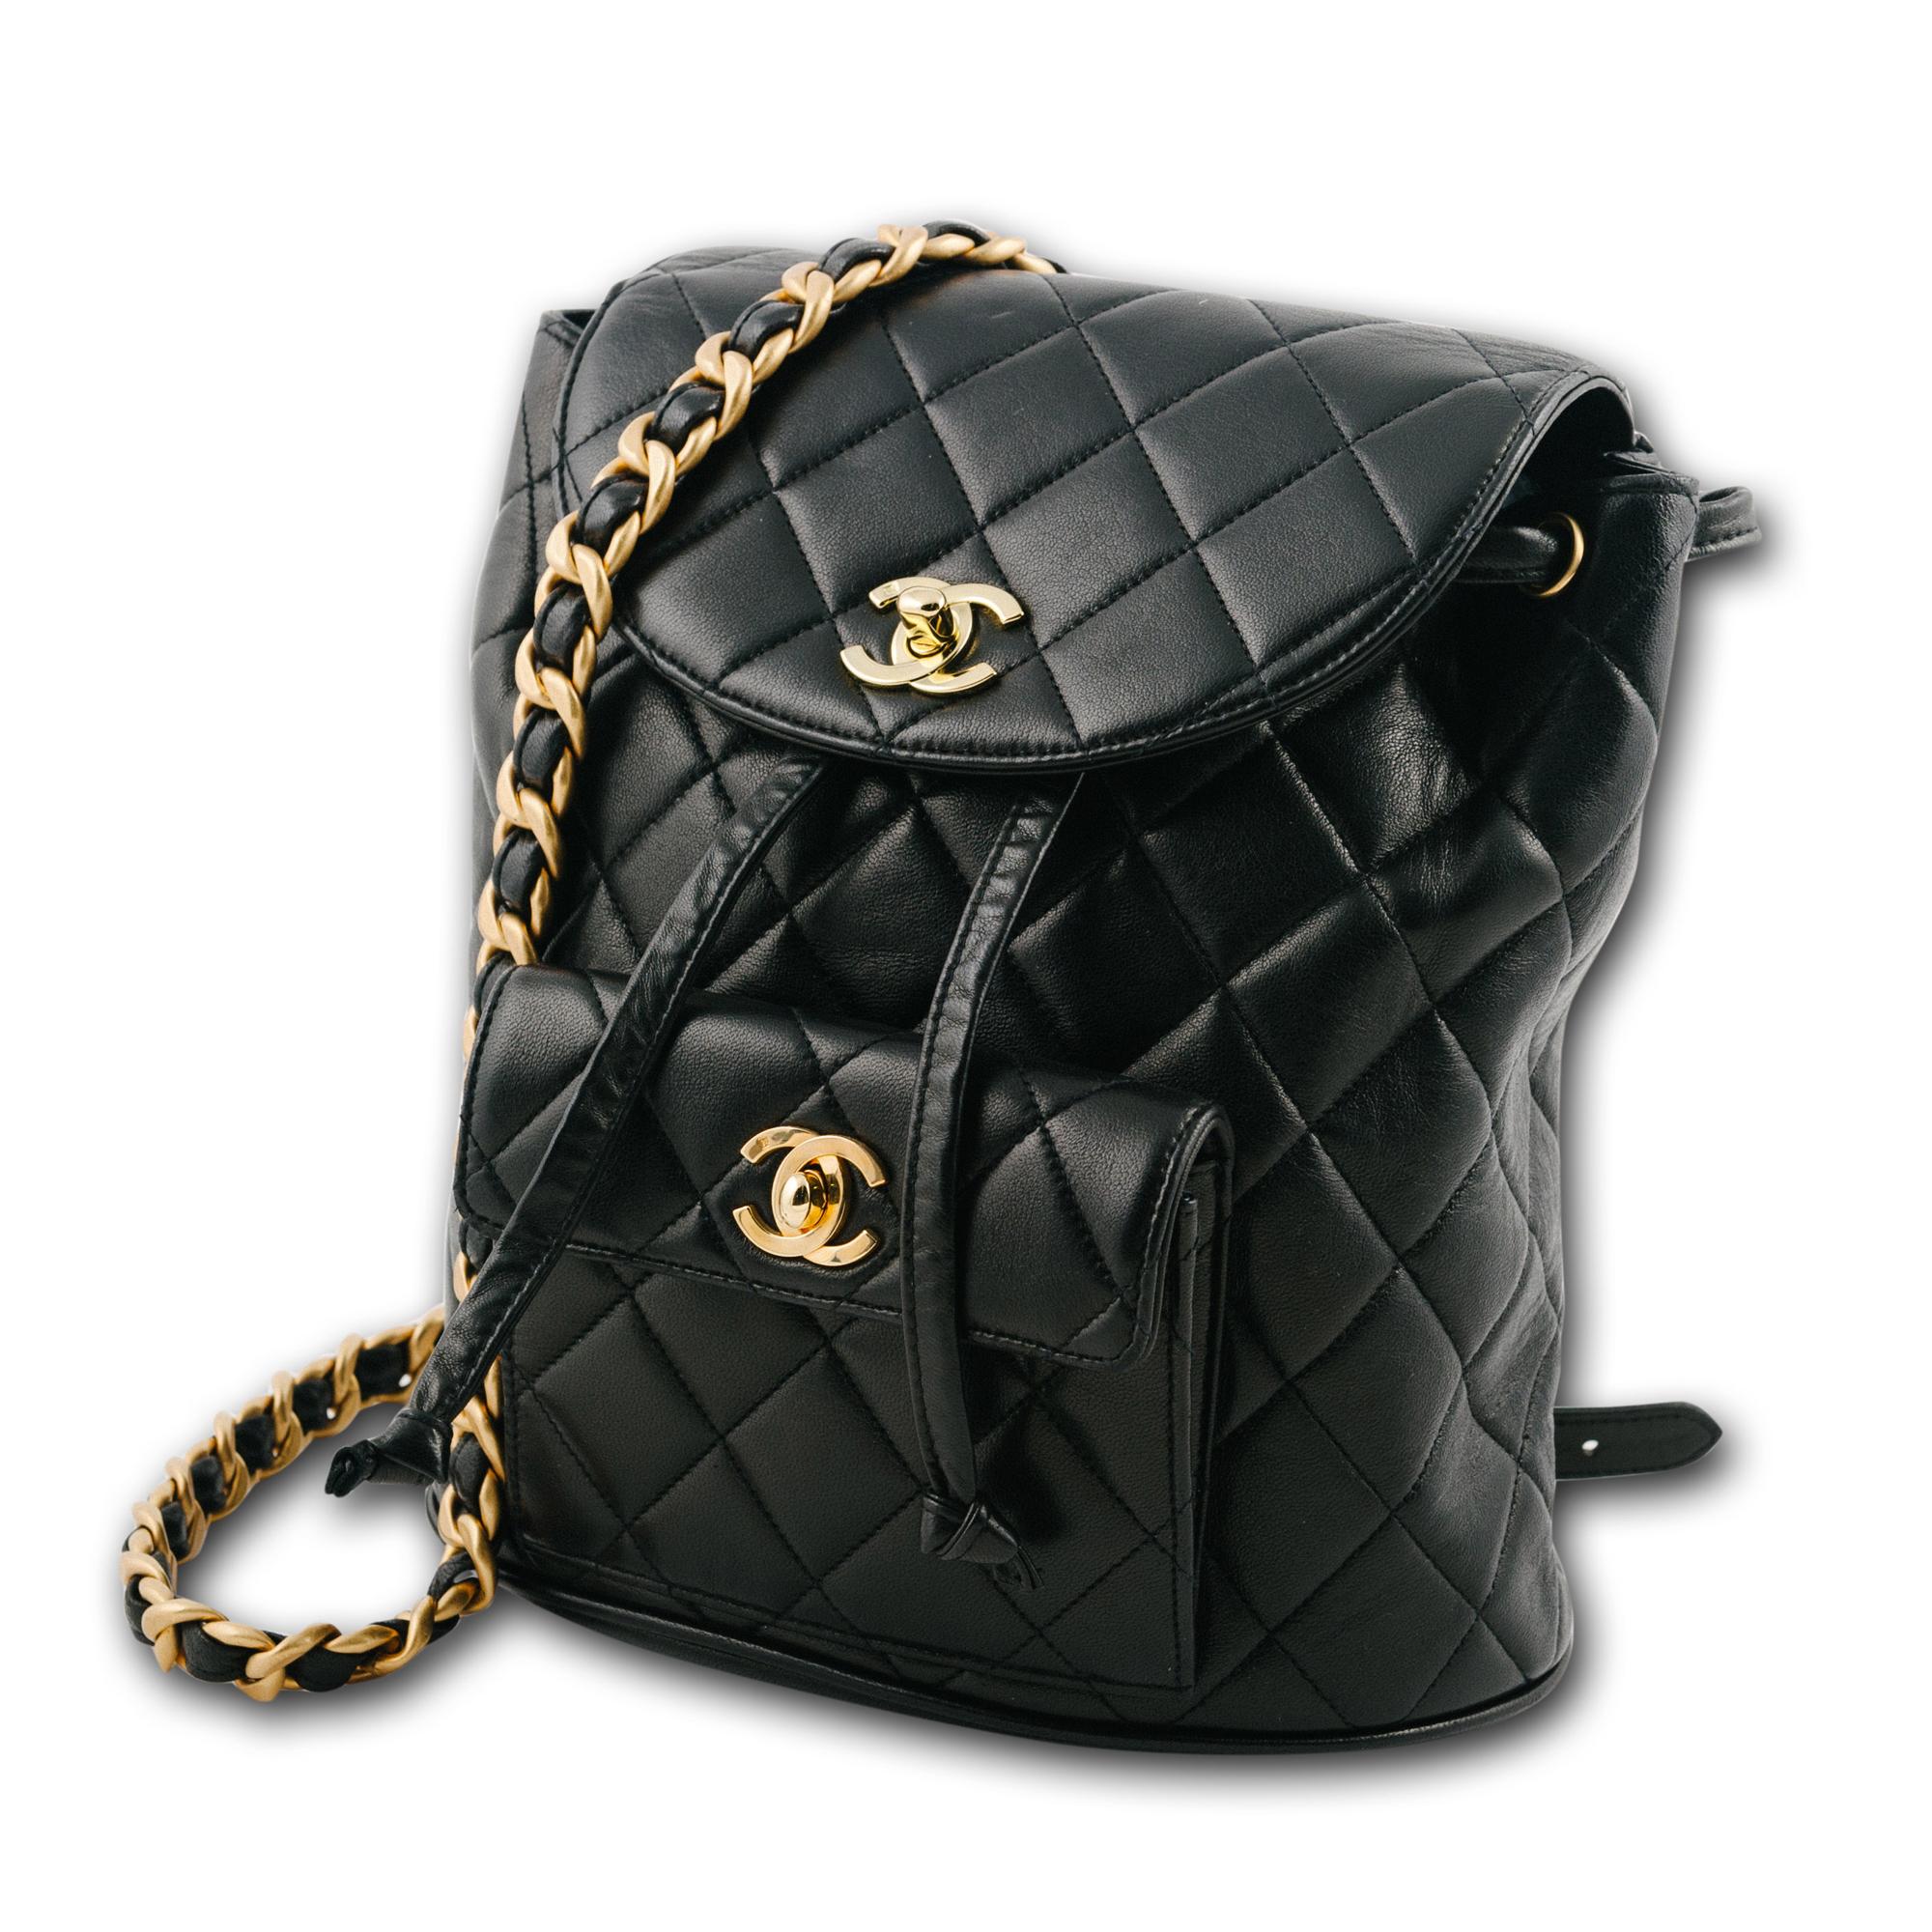 The model Backpack  is one of the most famous reference from the luxury House . Declined in many colors and materials, here it is offered in Black Quilted leather and Gold hardware. This product is rated as condition A. That means the product is in